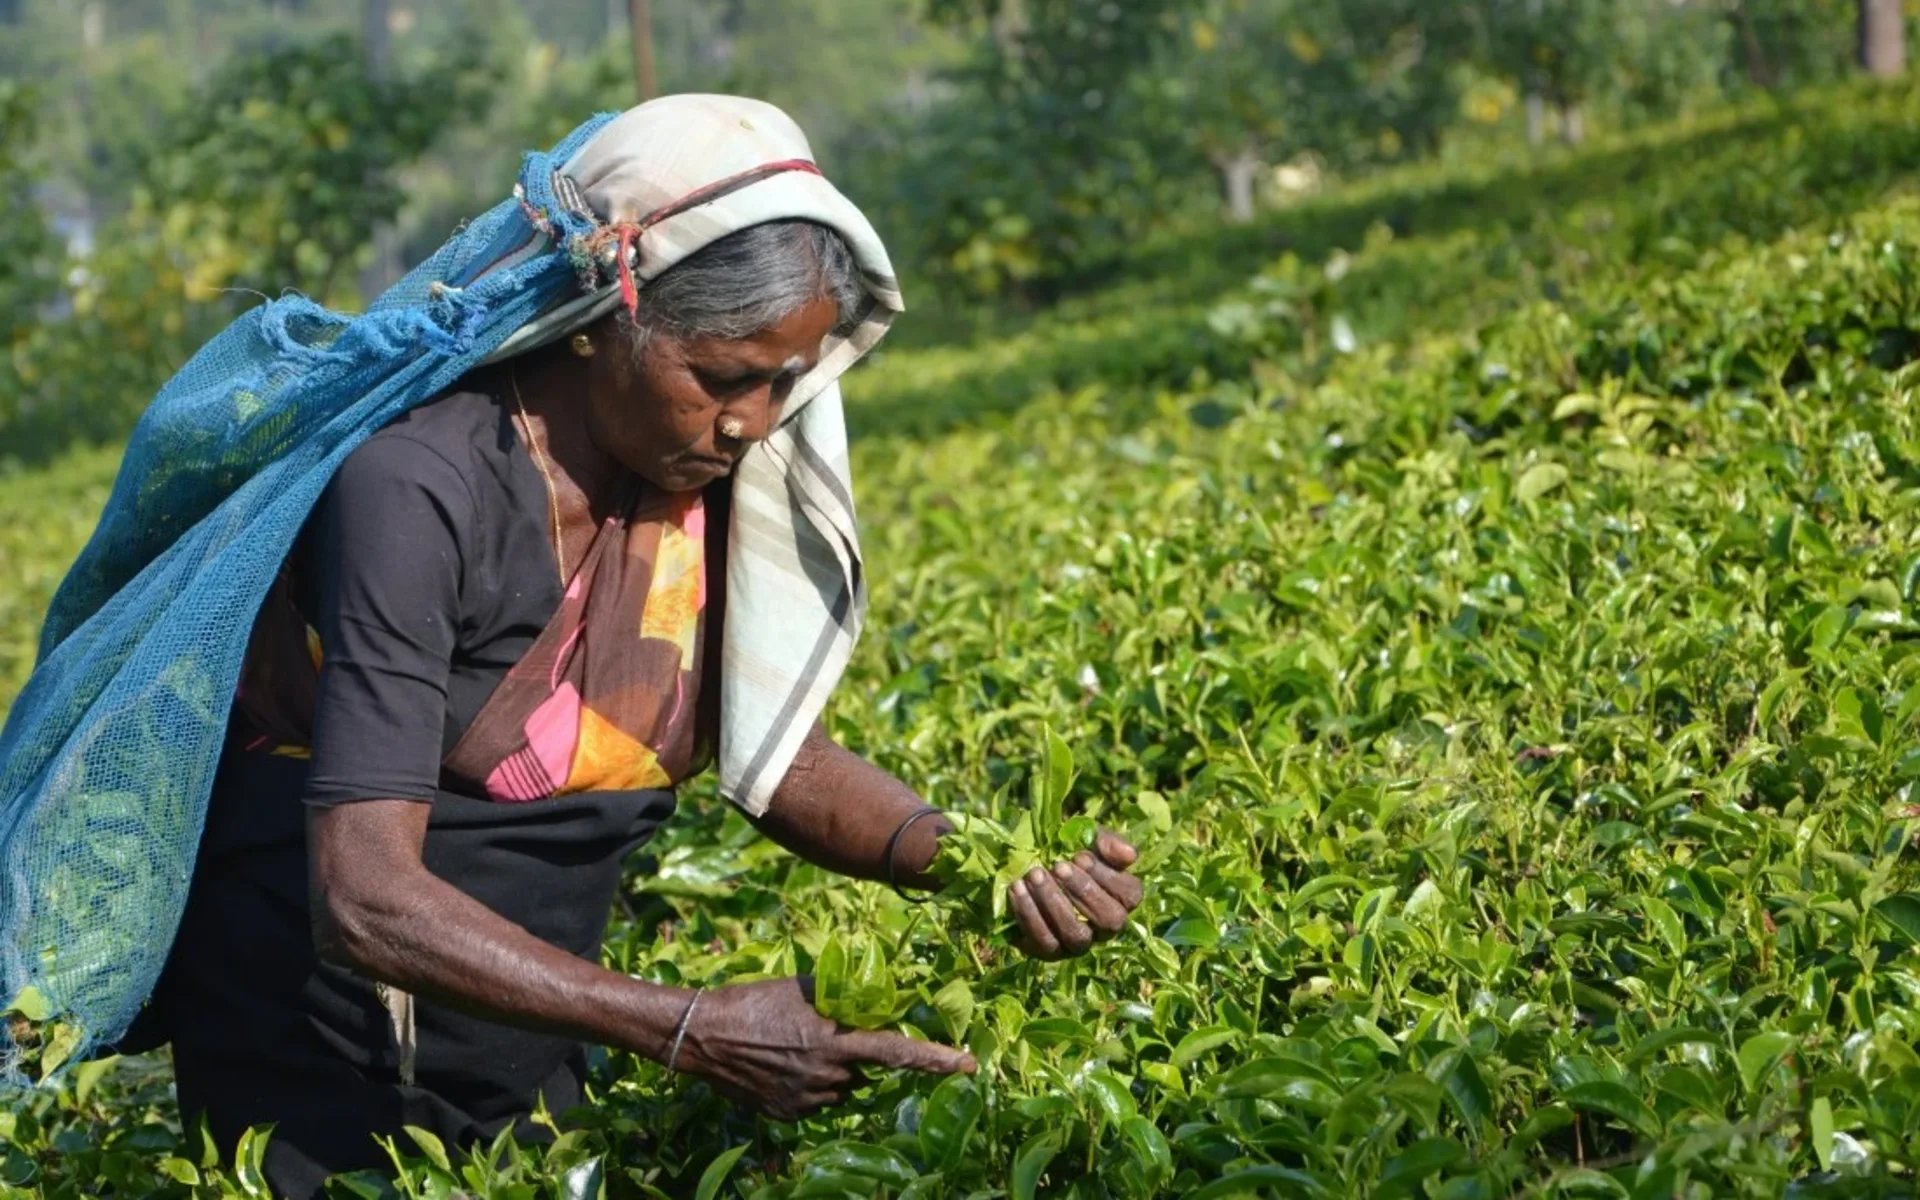 A lady is collecting tea leaves in Sri Lanka.